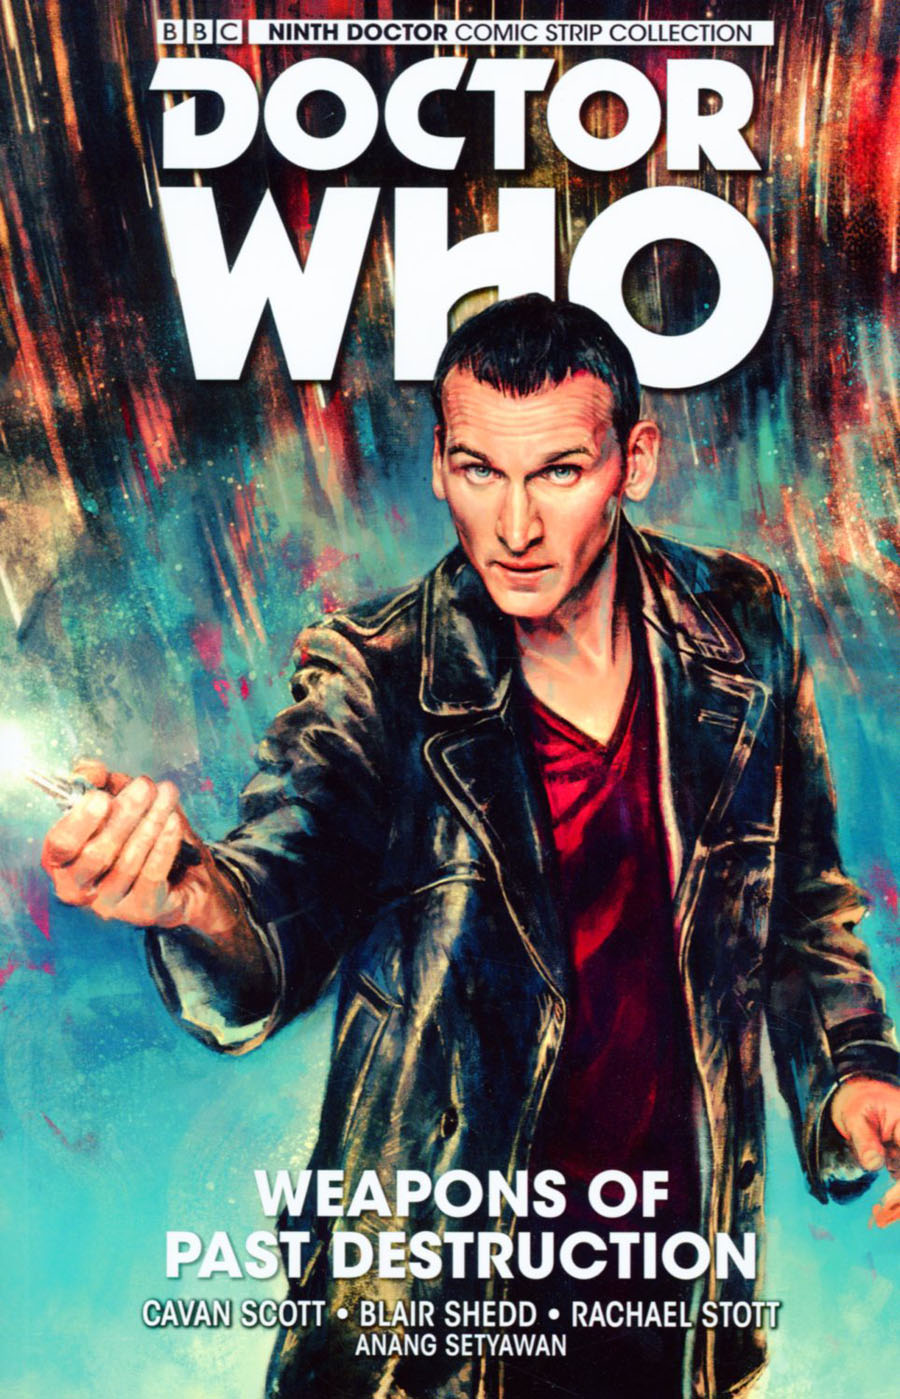 Doctor Who 9th Doctor Vol 1 Weapons Of Past Destruction TP